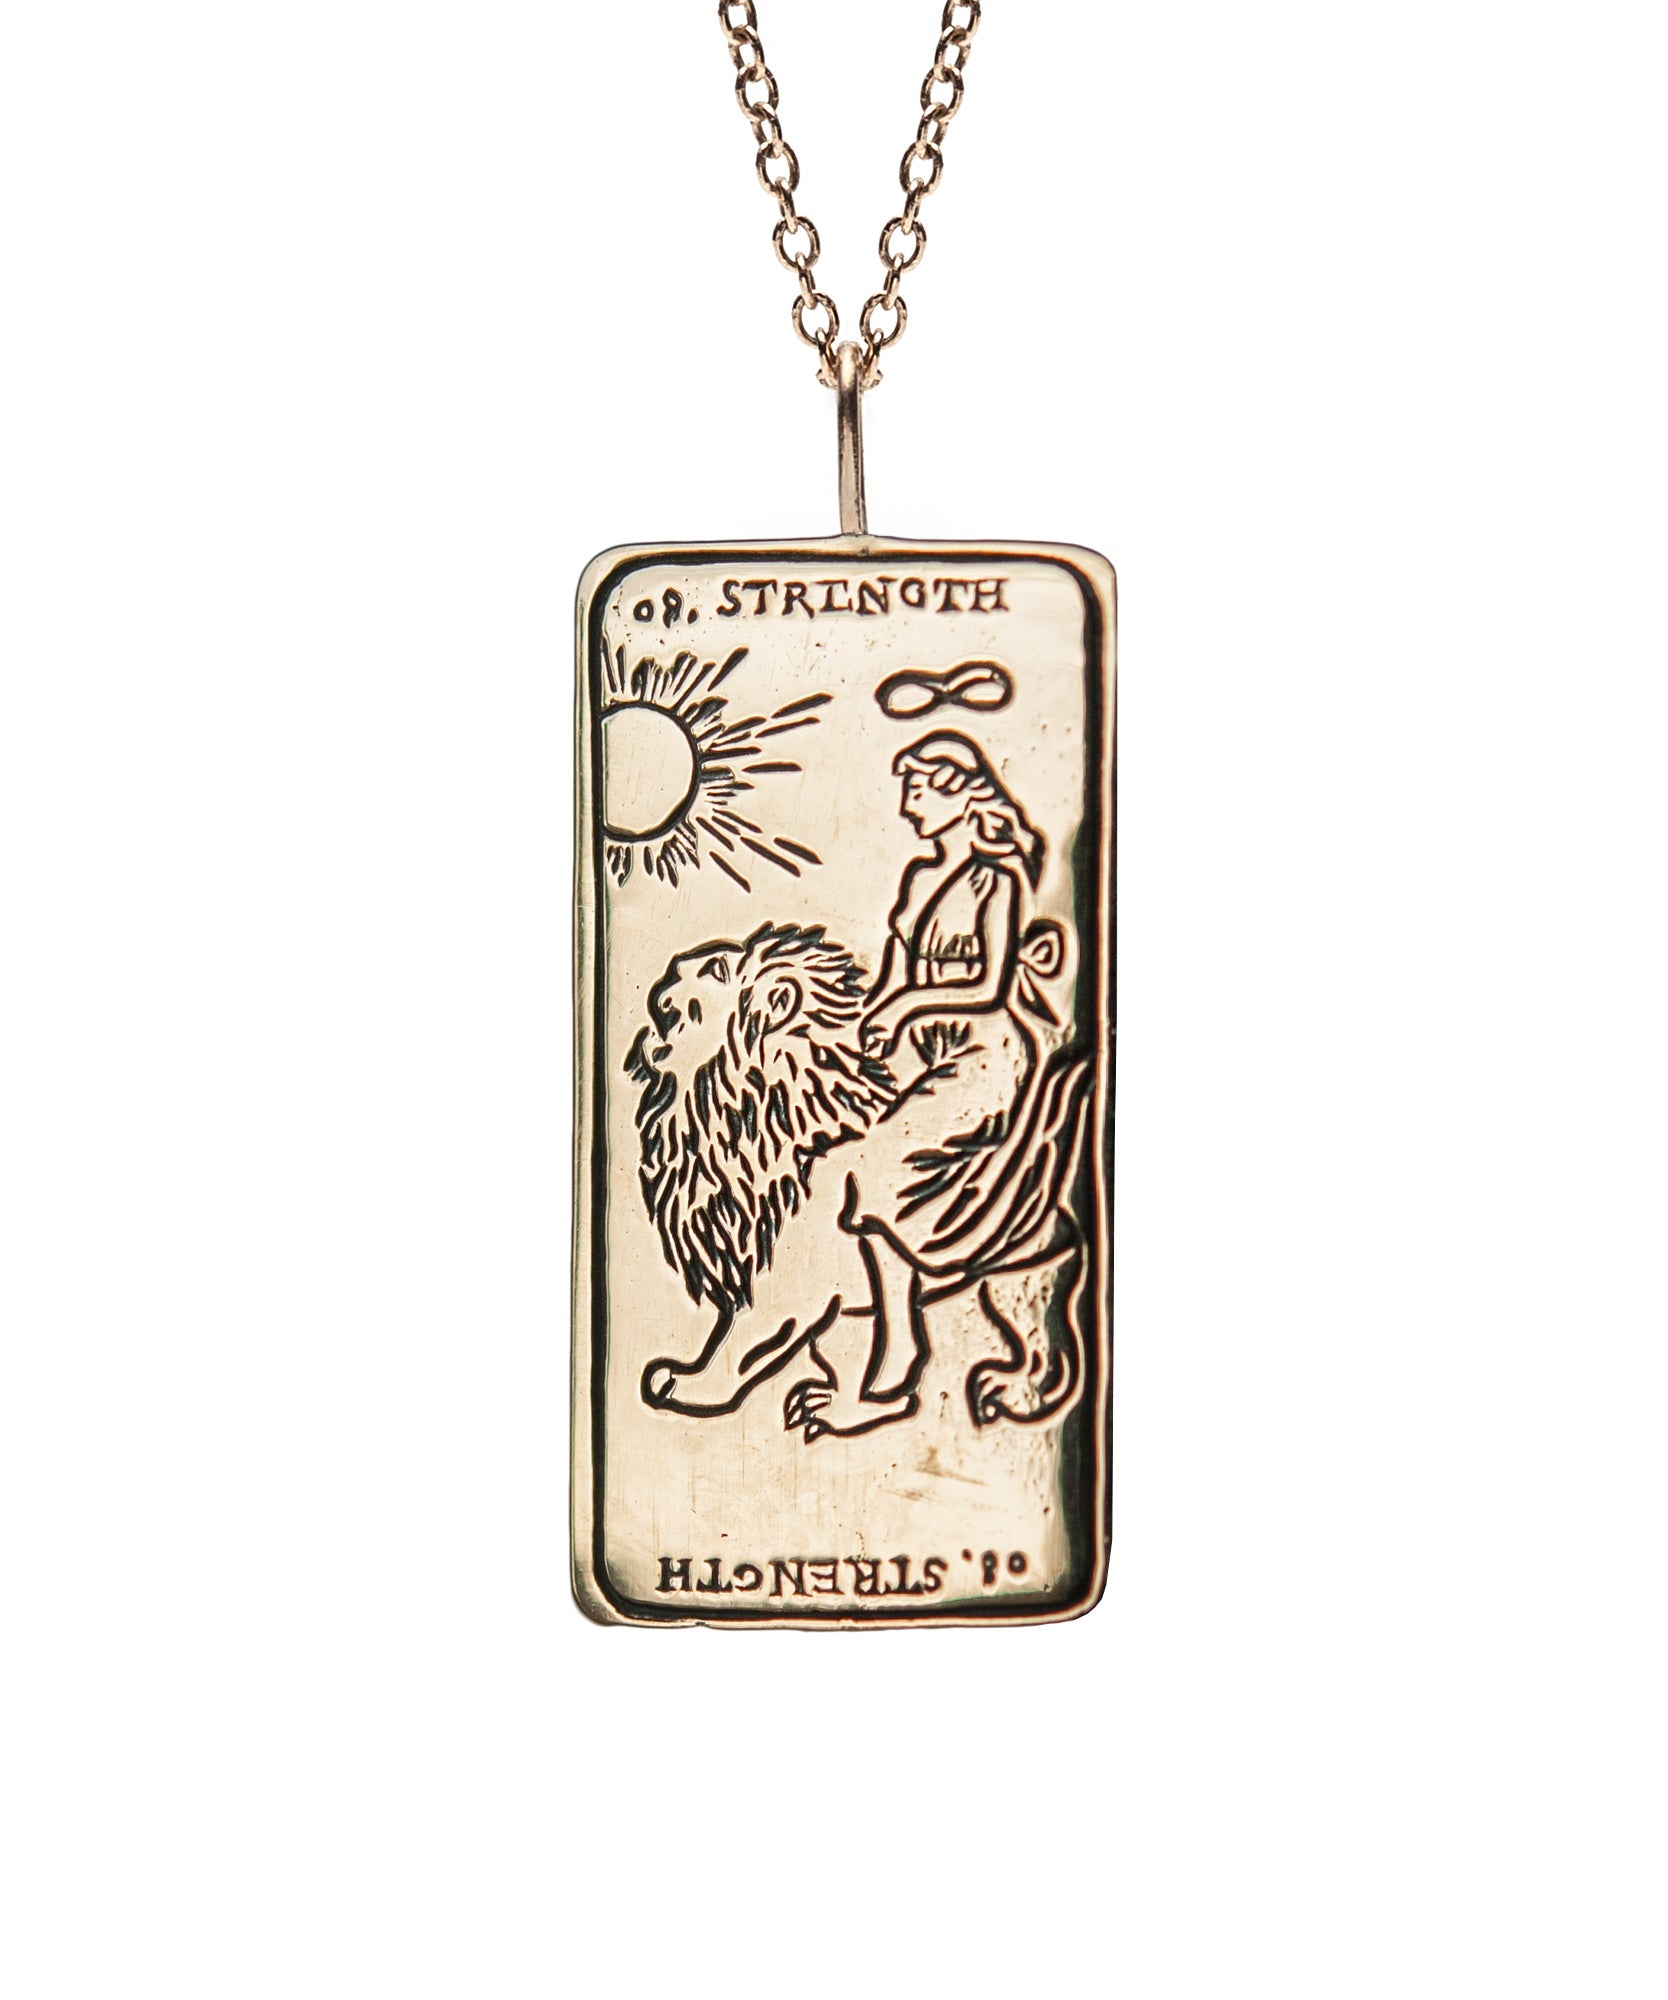 Buy The Fool Gold Tarot Card Necklace Best Friend Birthday Gift the Fool Tarot  Card Celestial Mystic Jewelry Witch Necklace Gold Tarot Online in India -  Etsy